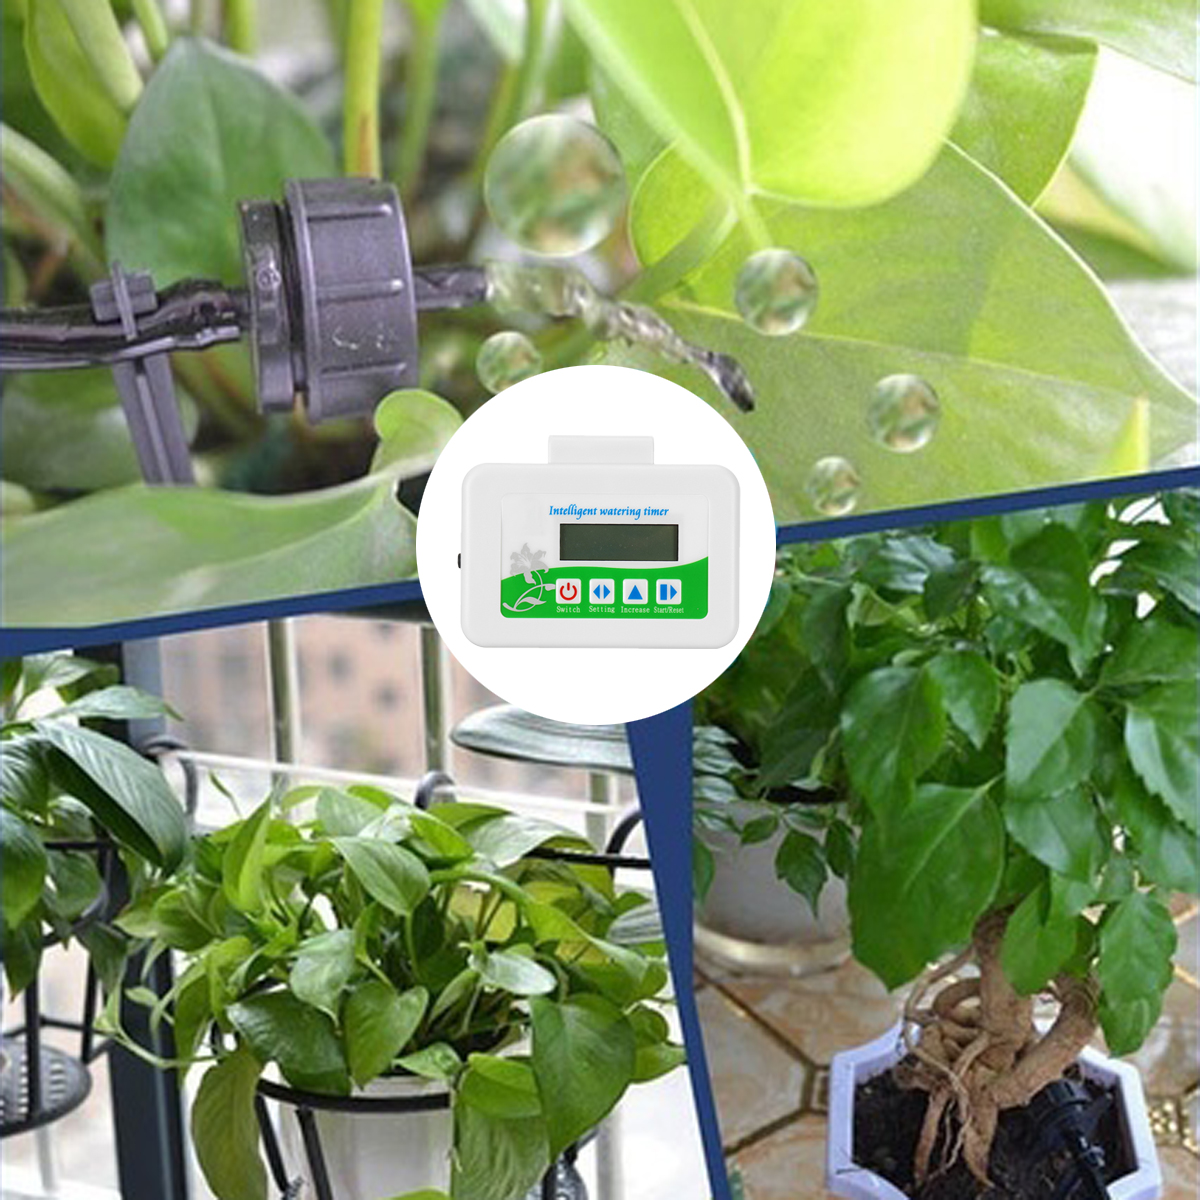 Intelligent-Watering-Timer-Automatic-Solar-Water-Controlle-Irrigation-System-Kit-1711287-10